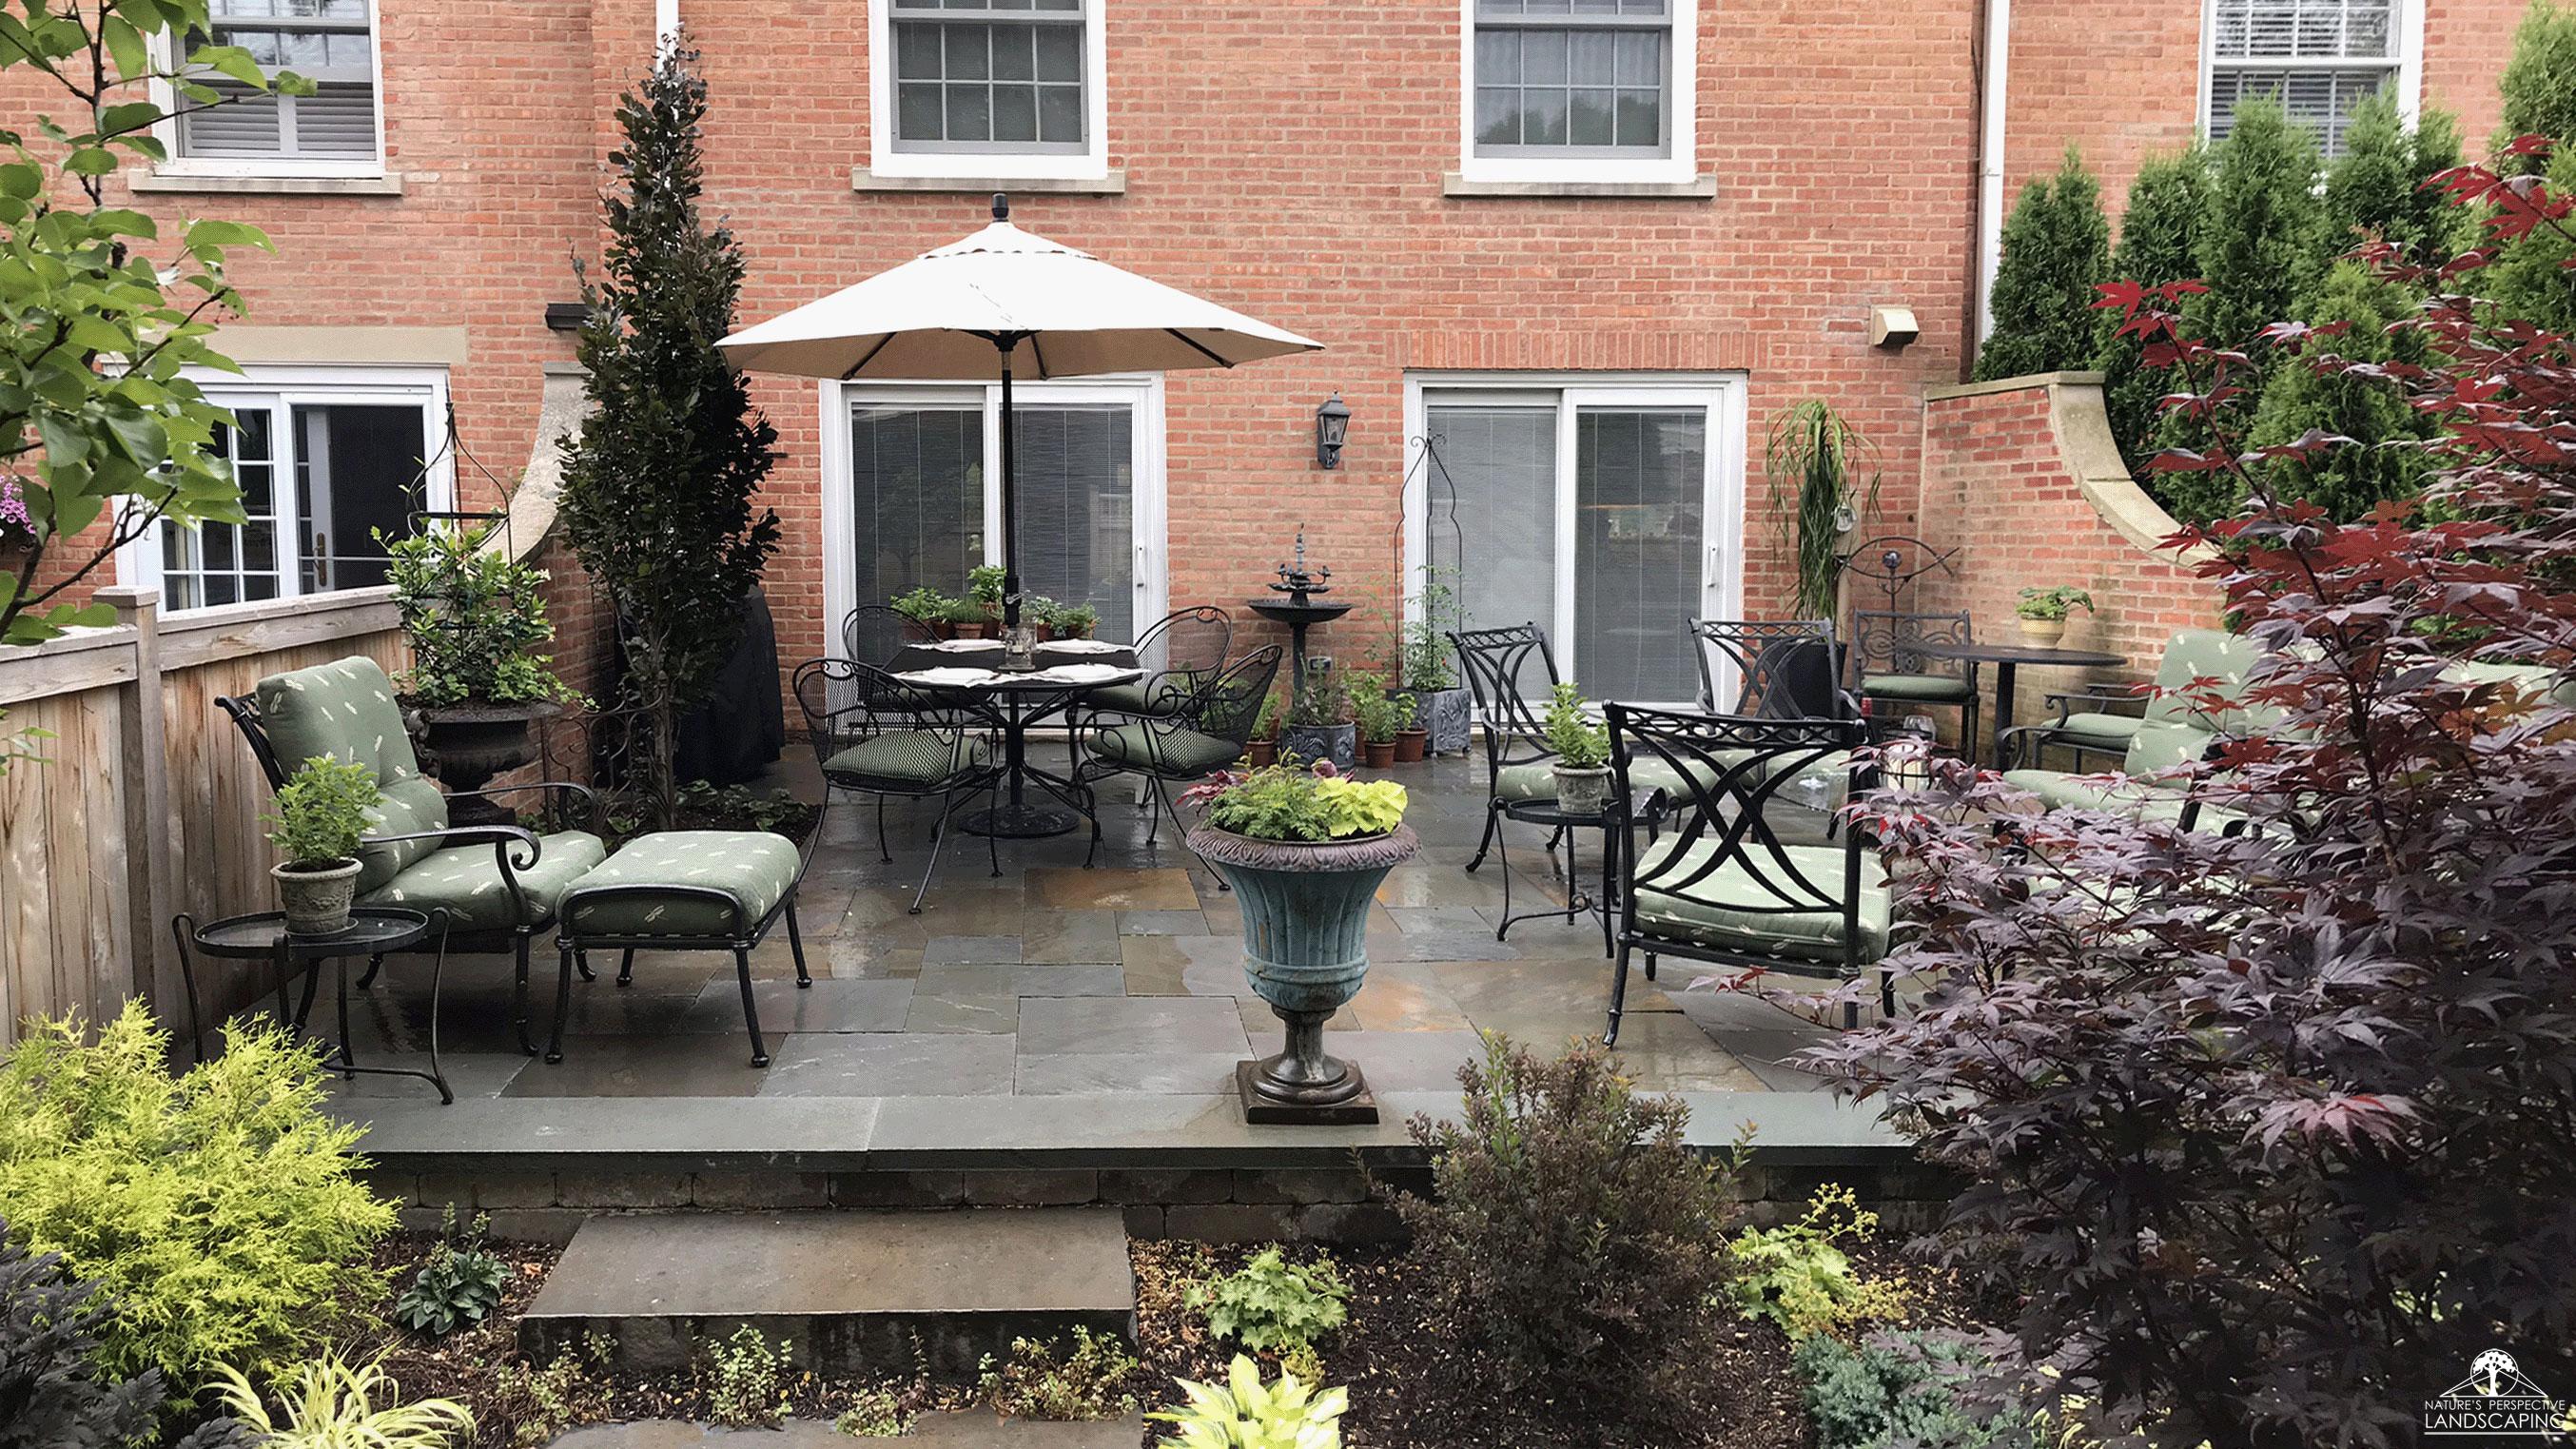 townhome bluestone patio and planting